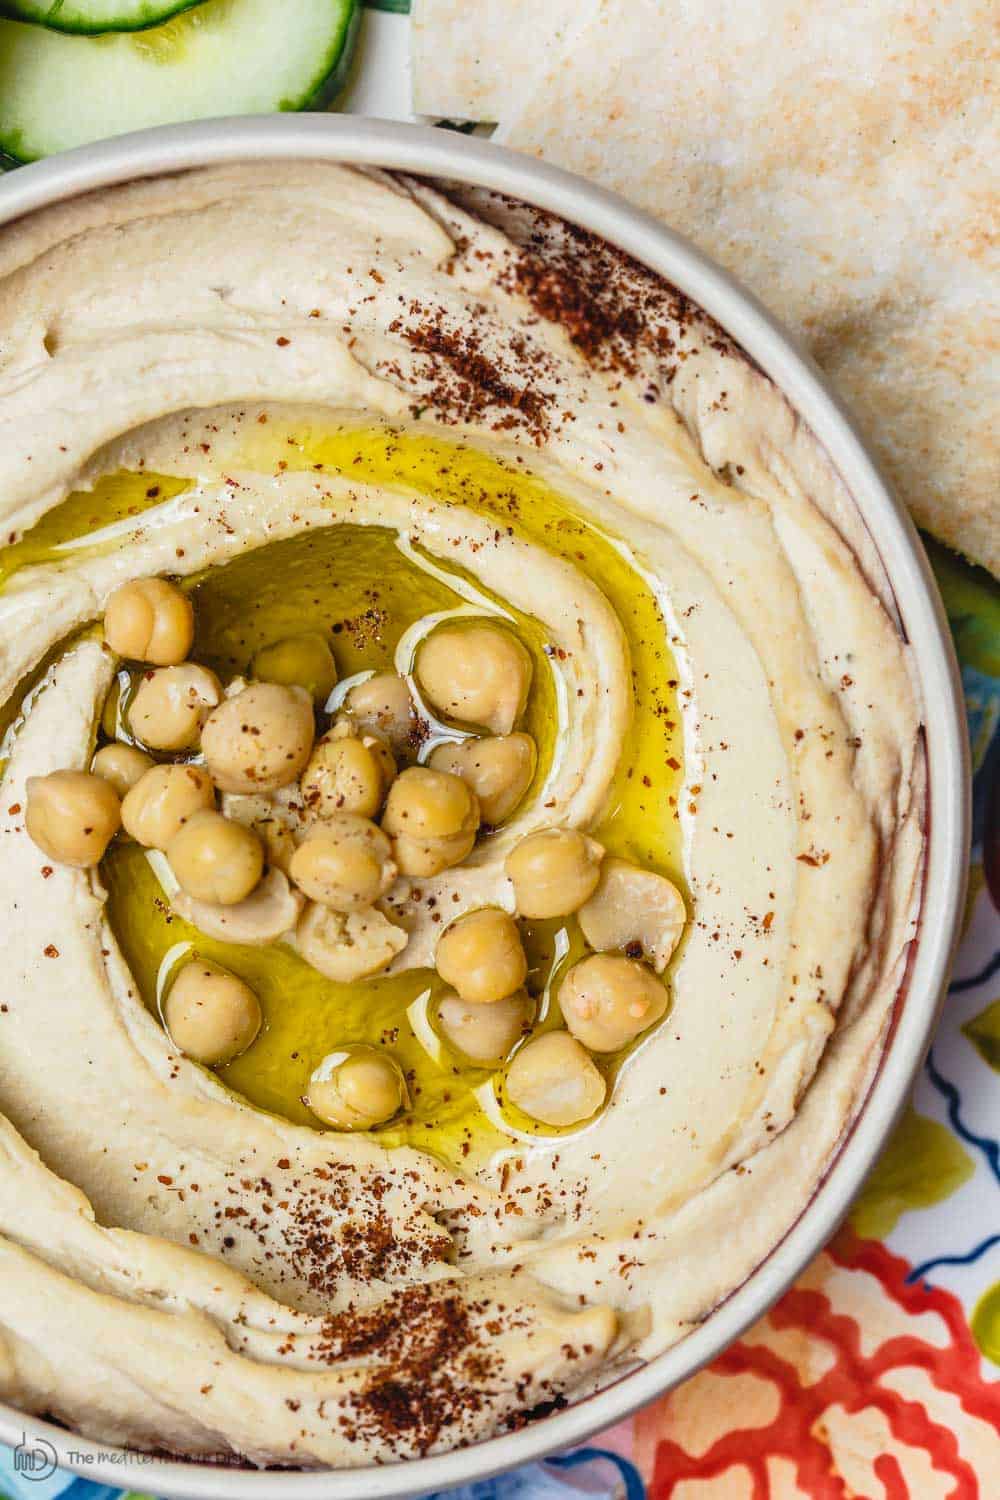 bowl of hummus with olive oil and chickpeas. A side of pita bread